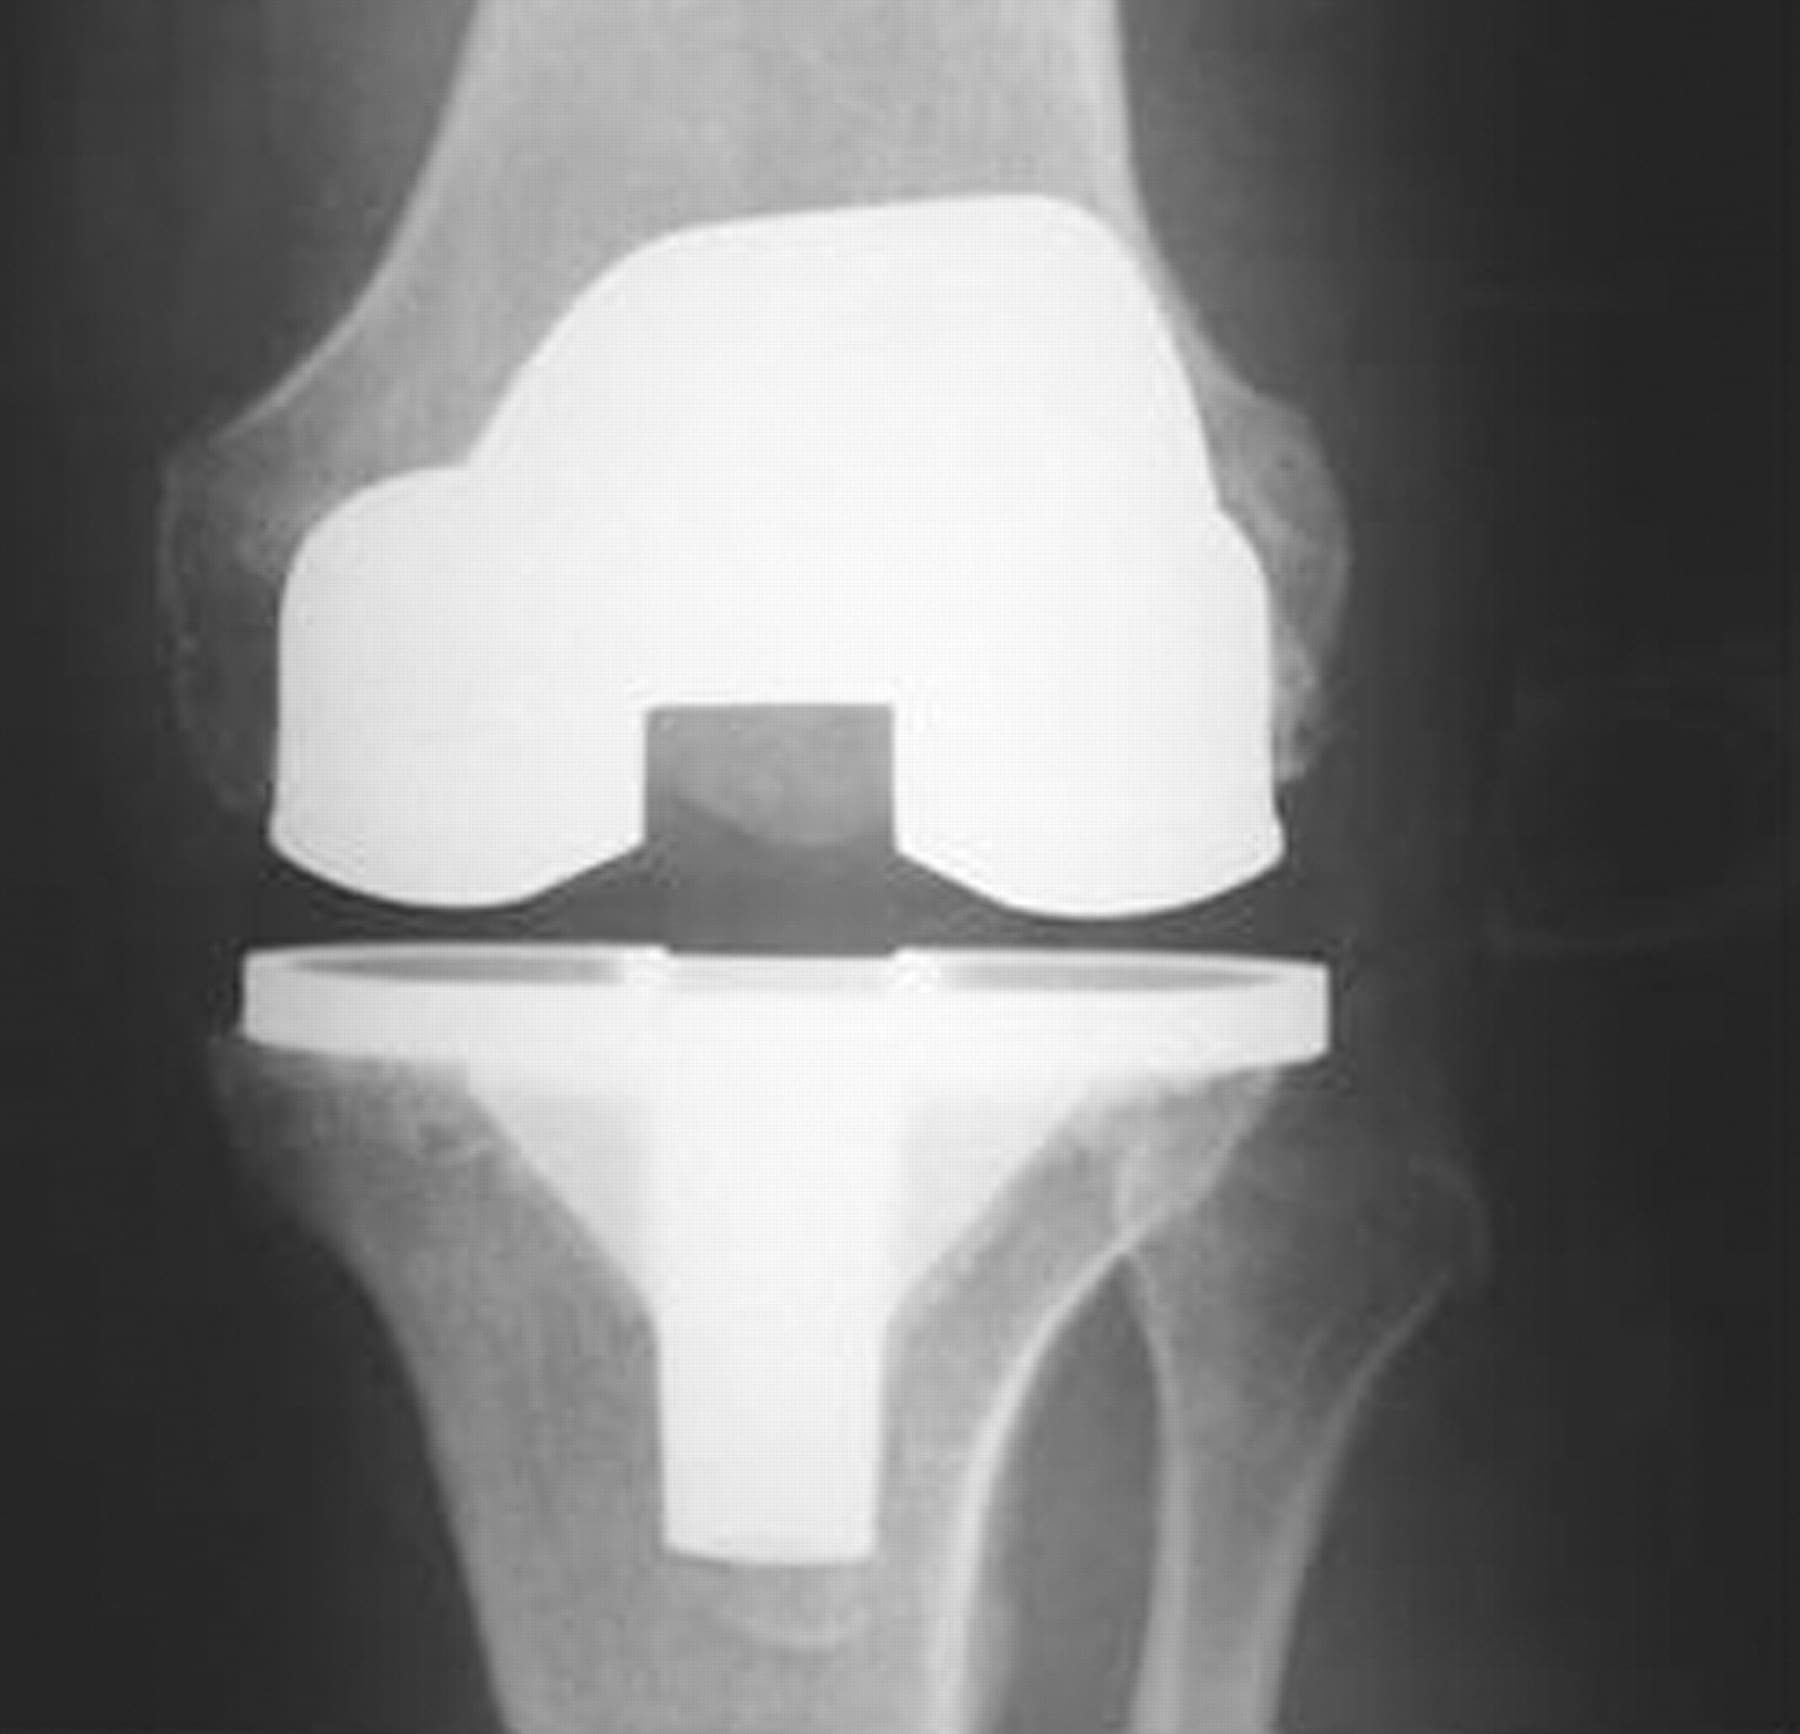 The orthopaedic approach to managing osteoarthritis of the knee